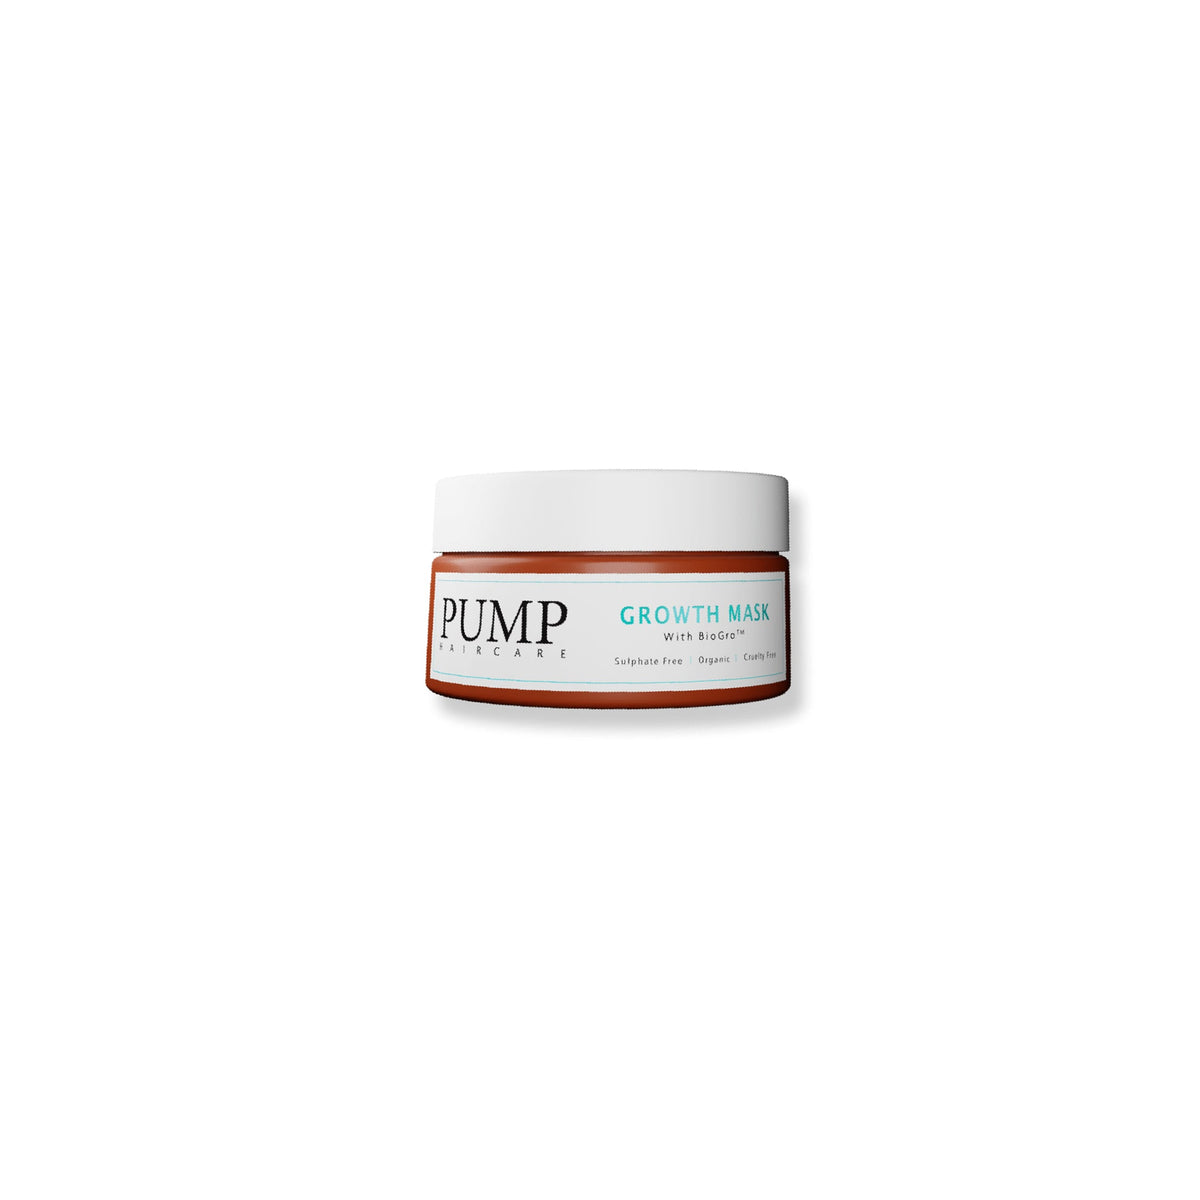 Pump Hair Growth Mask - Haircare Superstore